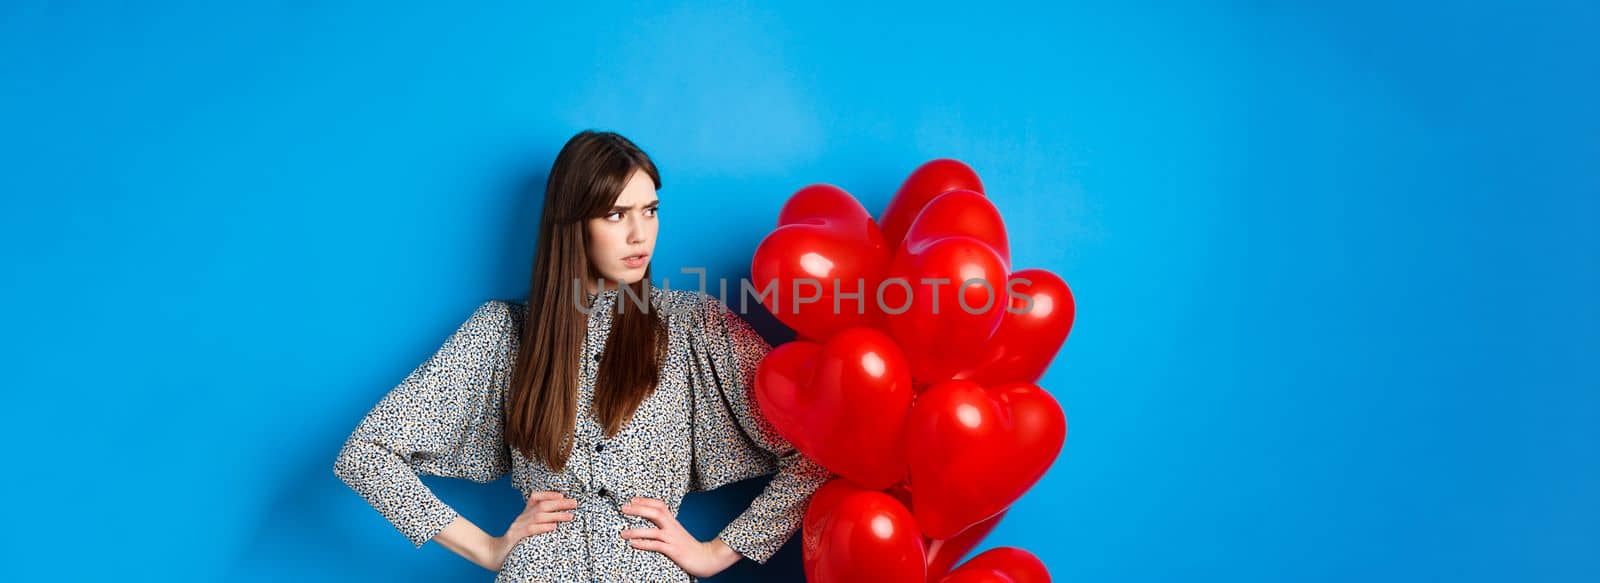 Valentines day. Annoyed and bothered girl complaining, looking left at empty space and frowning, standing near heart balloons, blue background.